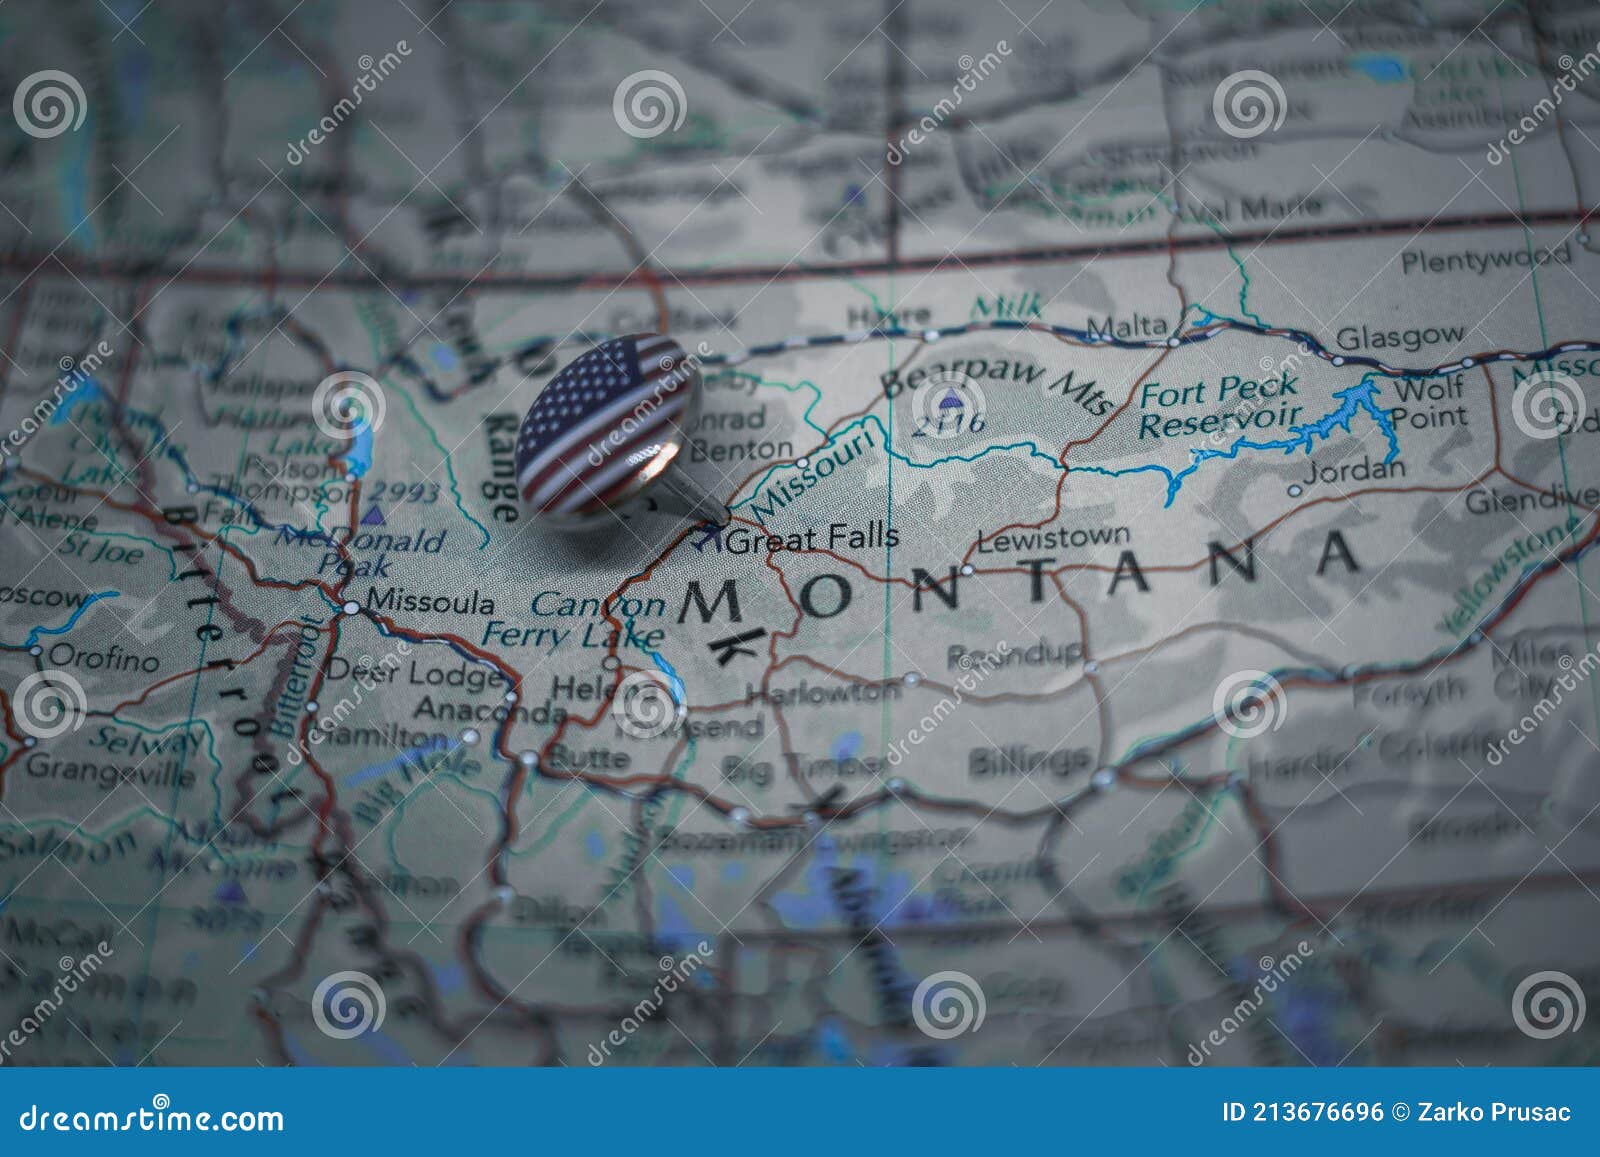 great falls, montana pinned on a map with usa flag